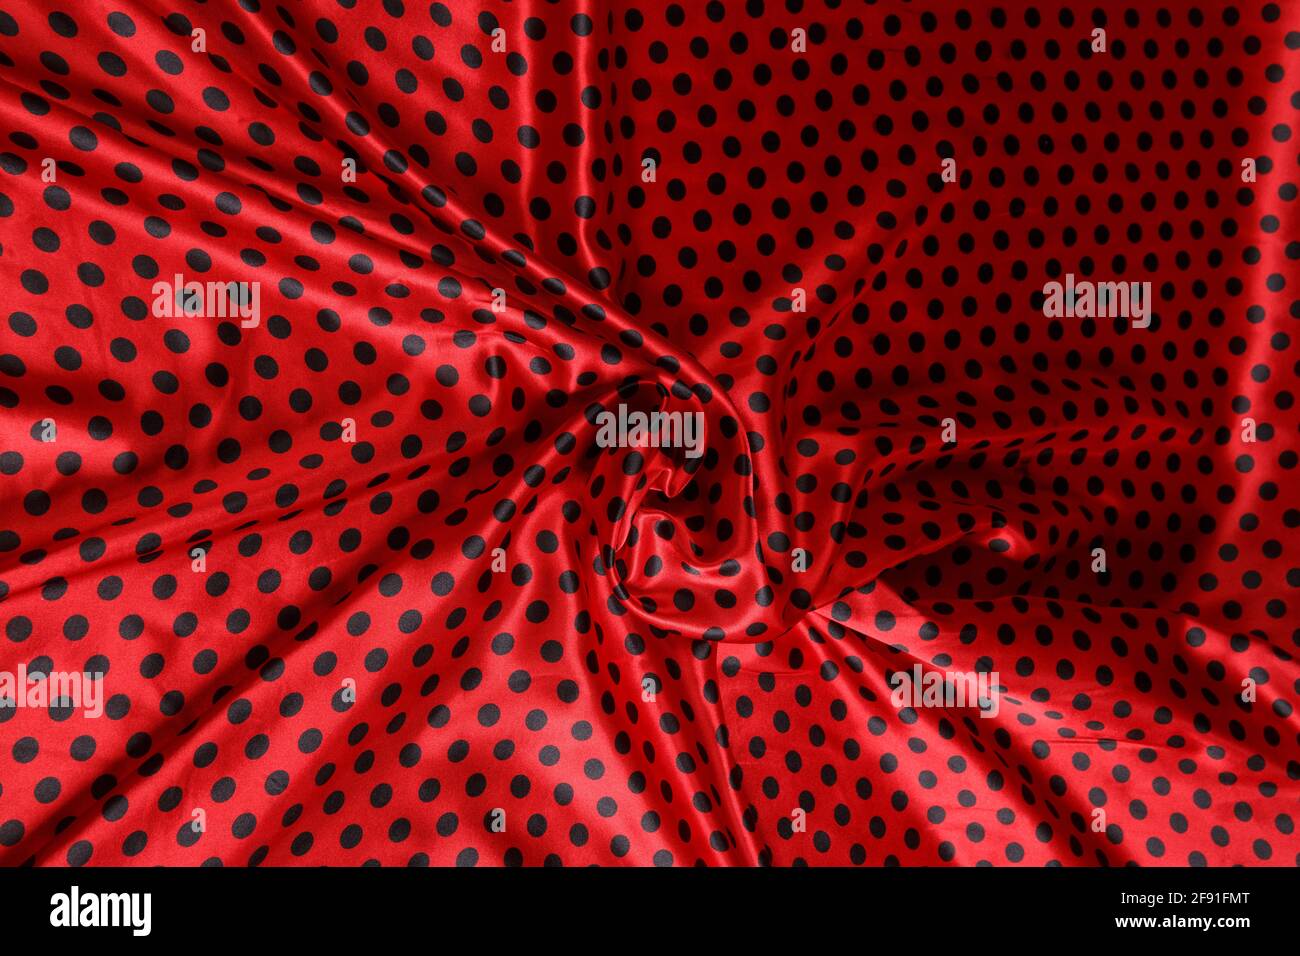 Colored red polka dotted textile satin fabric folded in folds and waves with highlights and texture shimmers in the light Stock Photo